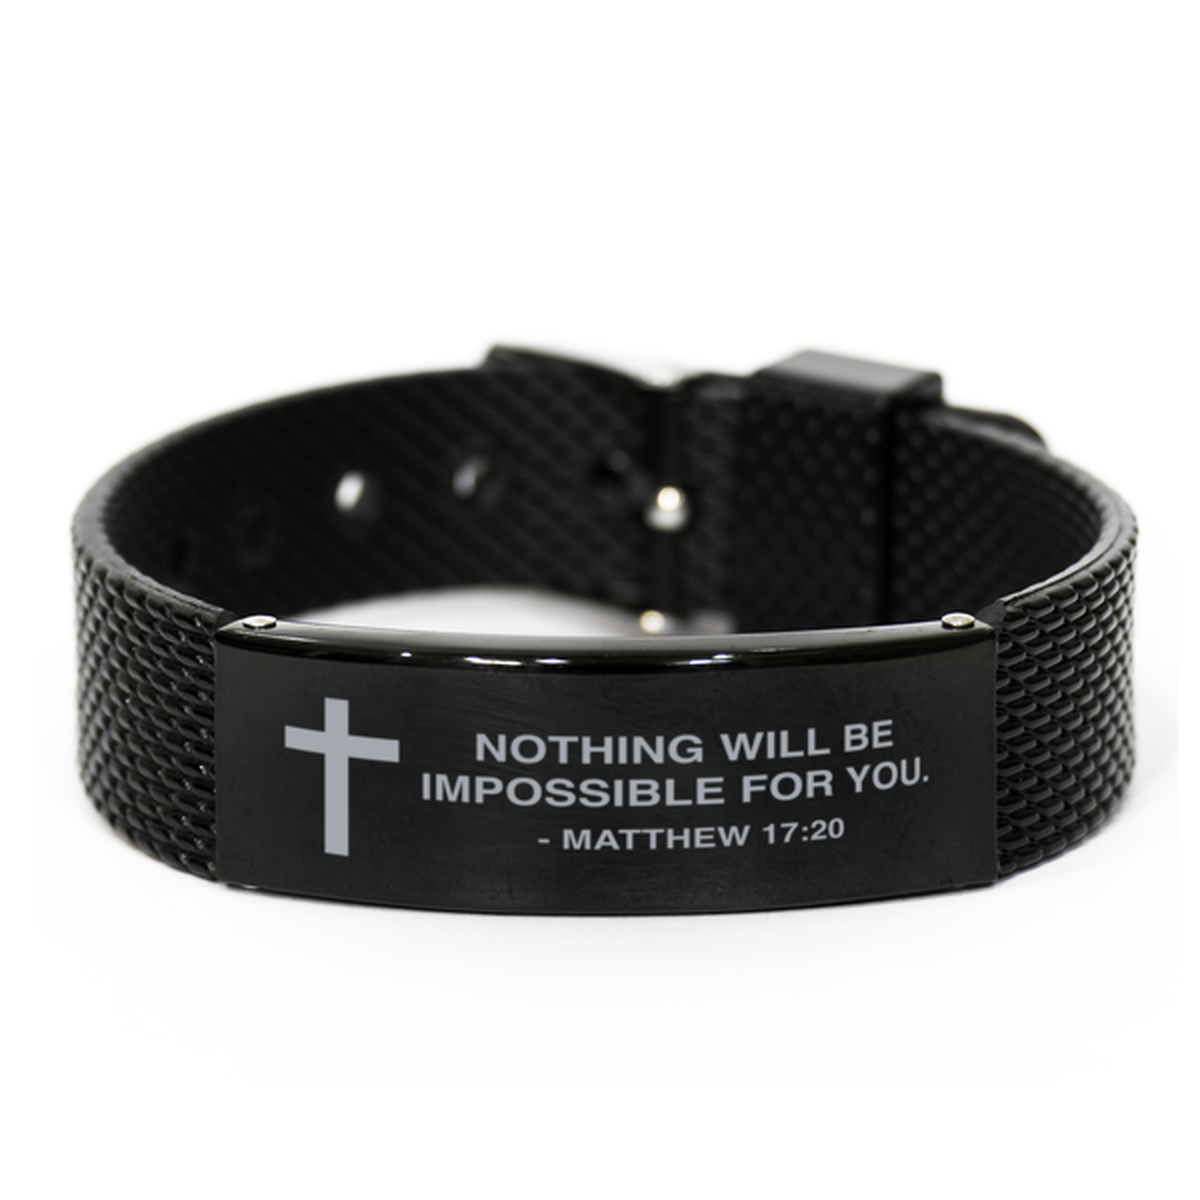 Christian Black Bracelet, Nothing Will Be Impossible For You, Matthew 17:20, Inspirational Bible Verse Gifts For Men Women